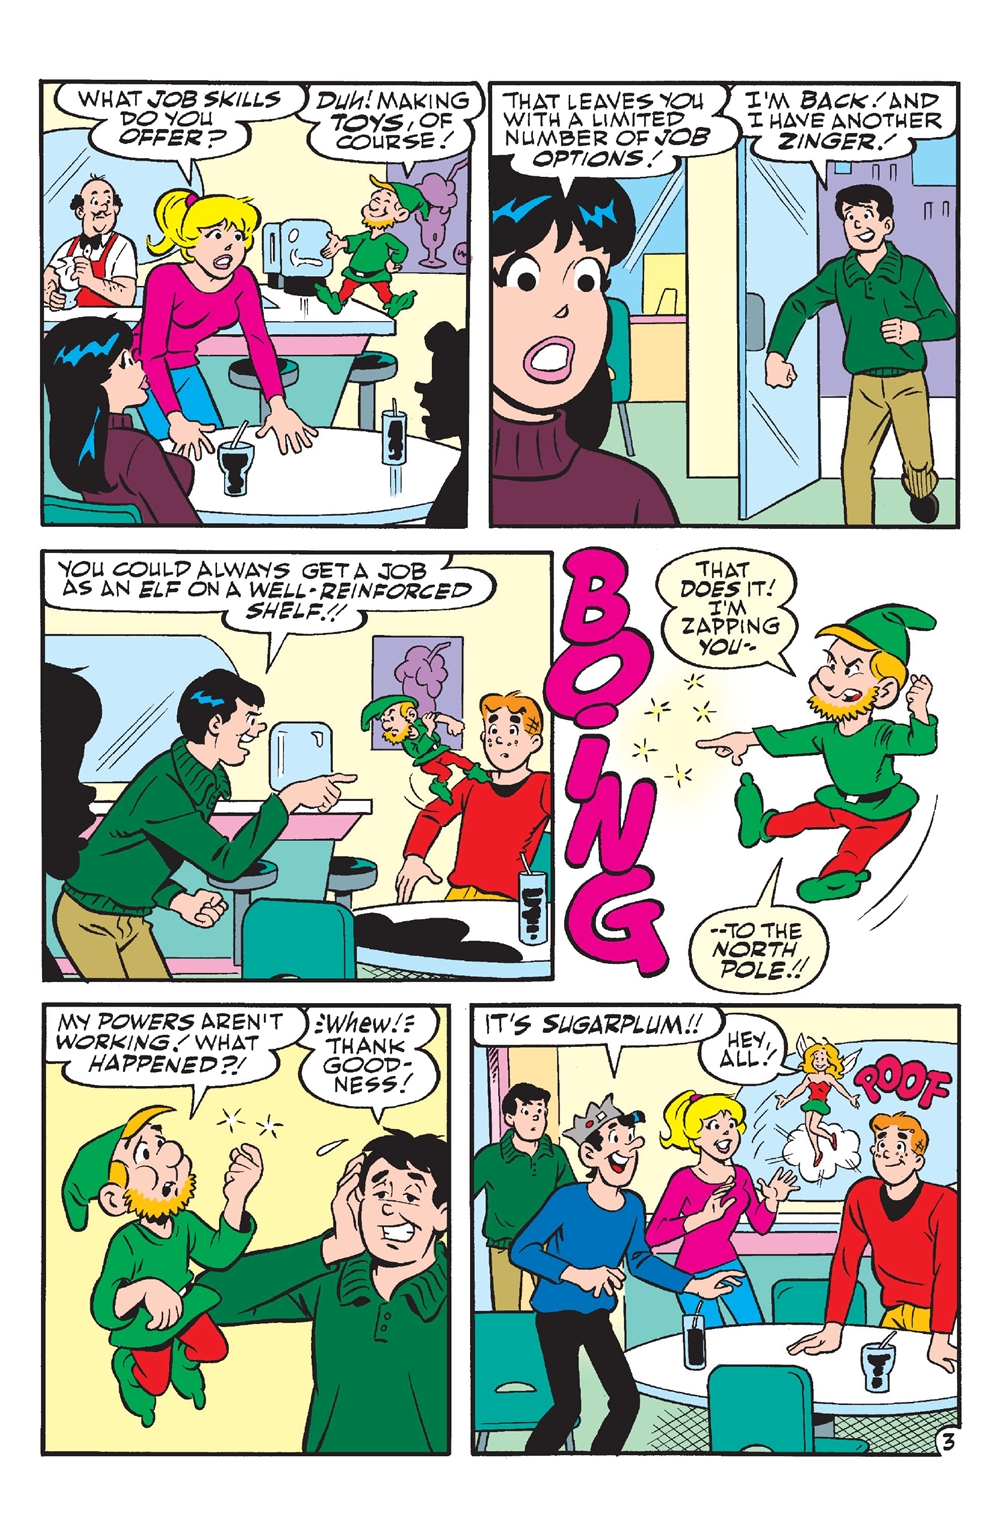 Archie%2527s%2BChristmas%2BSpectacular%2B2020%2B001-020